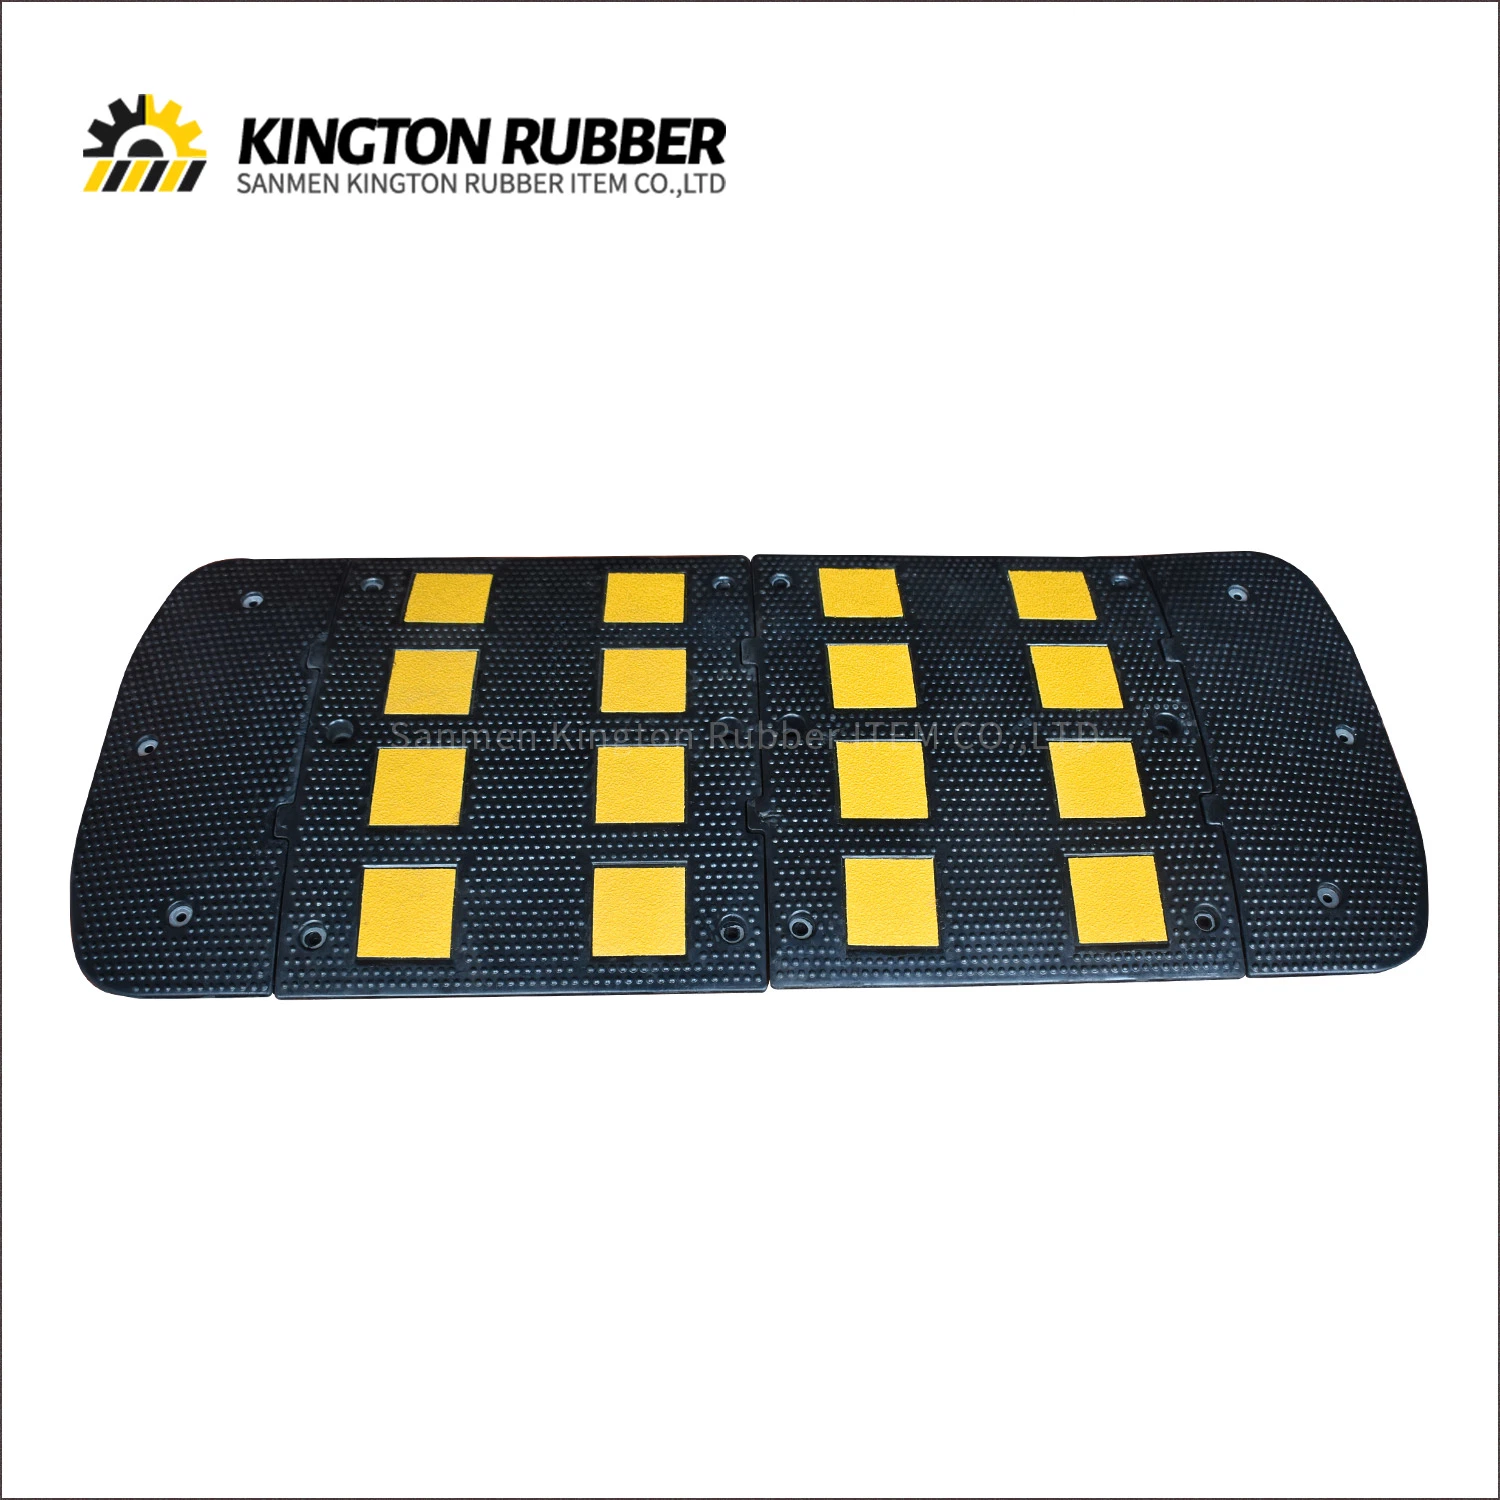 Black & Yellow Reflective Safety Traffic Humps Rubber Road Speed Bumps